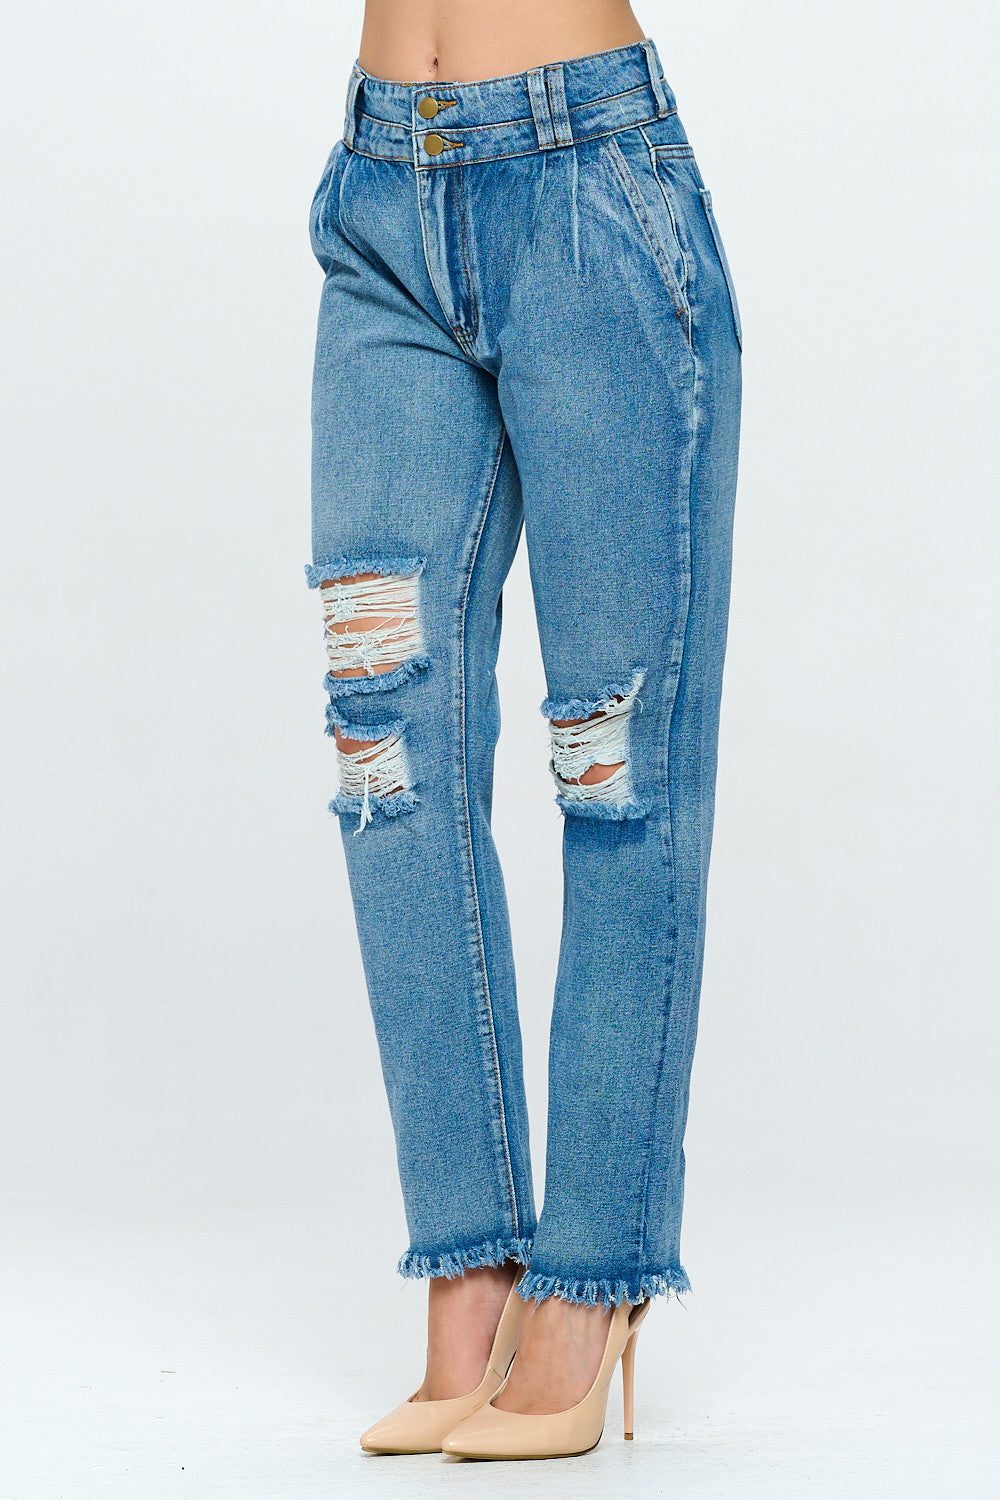 Fringed 90's High Rise Mom Jean With Double Waistband Medium DH2107